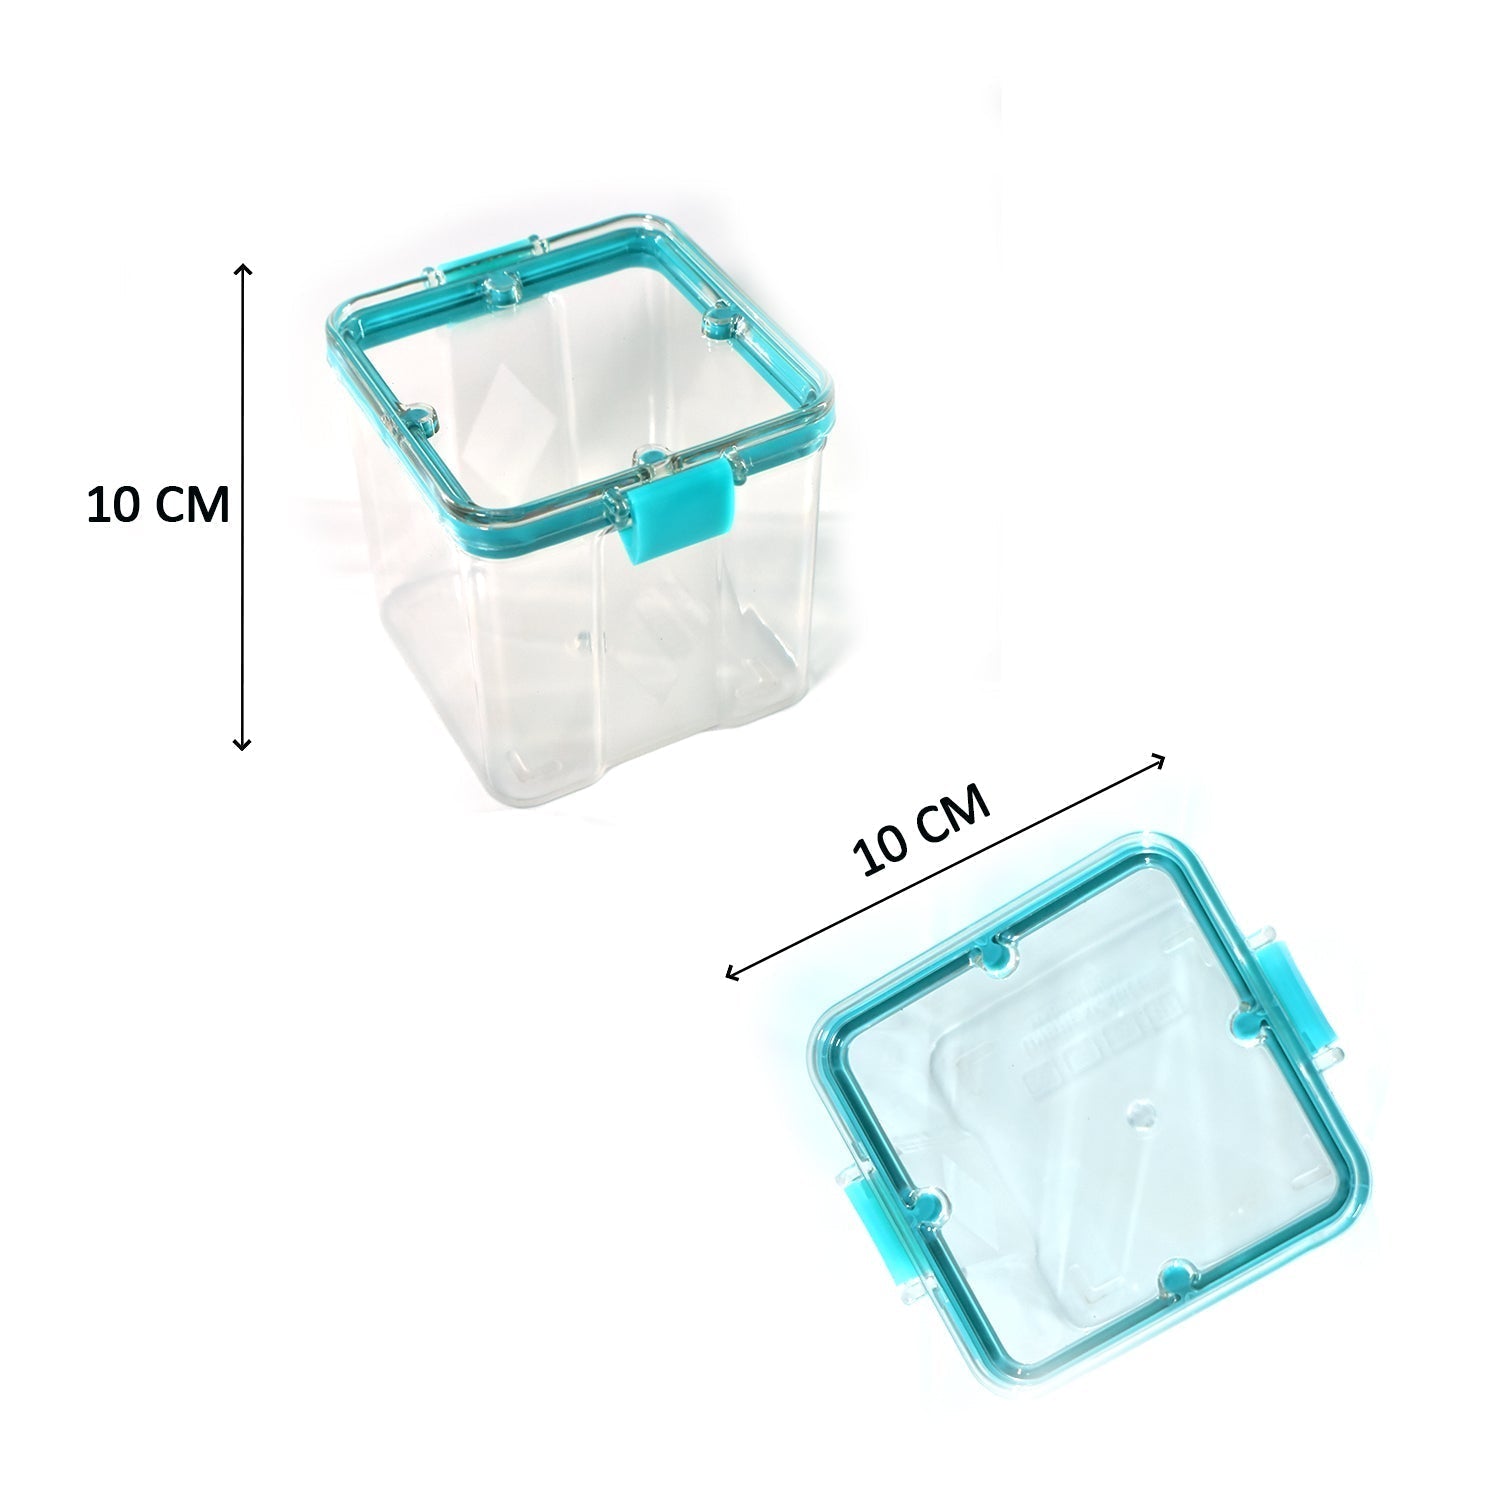 2763 4Pc Square Container 700Ml Used For Storing Types Of Food Stuffs And Items.